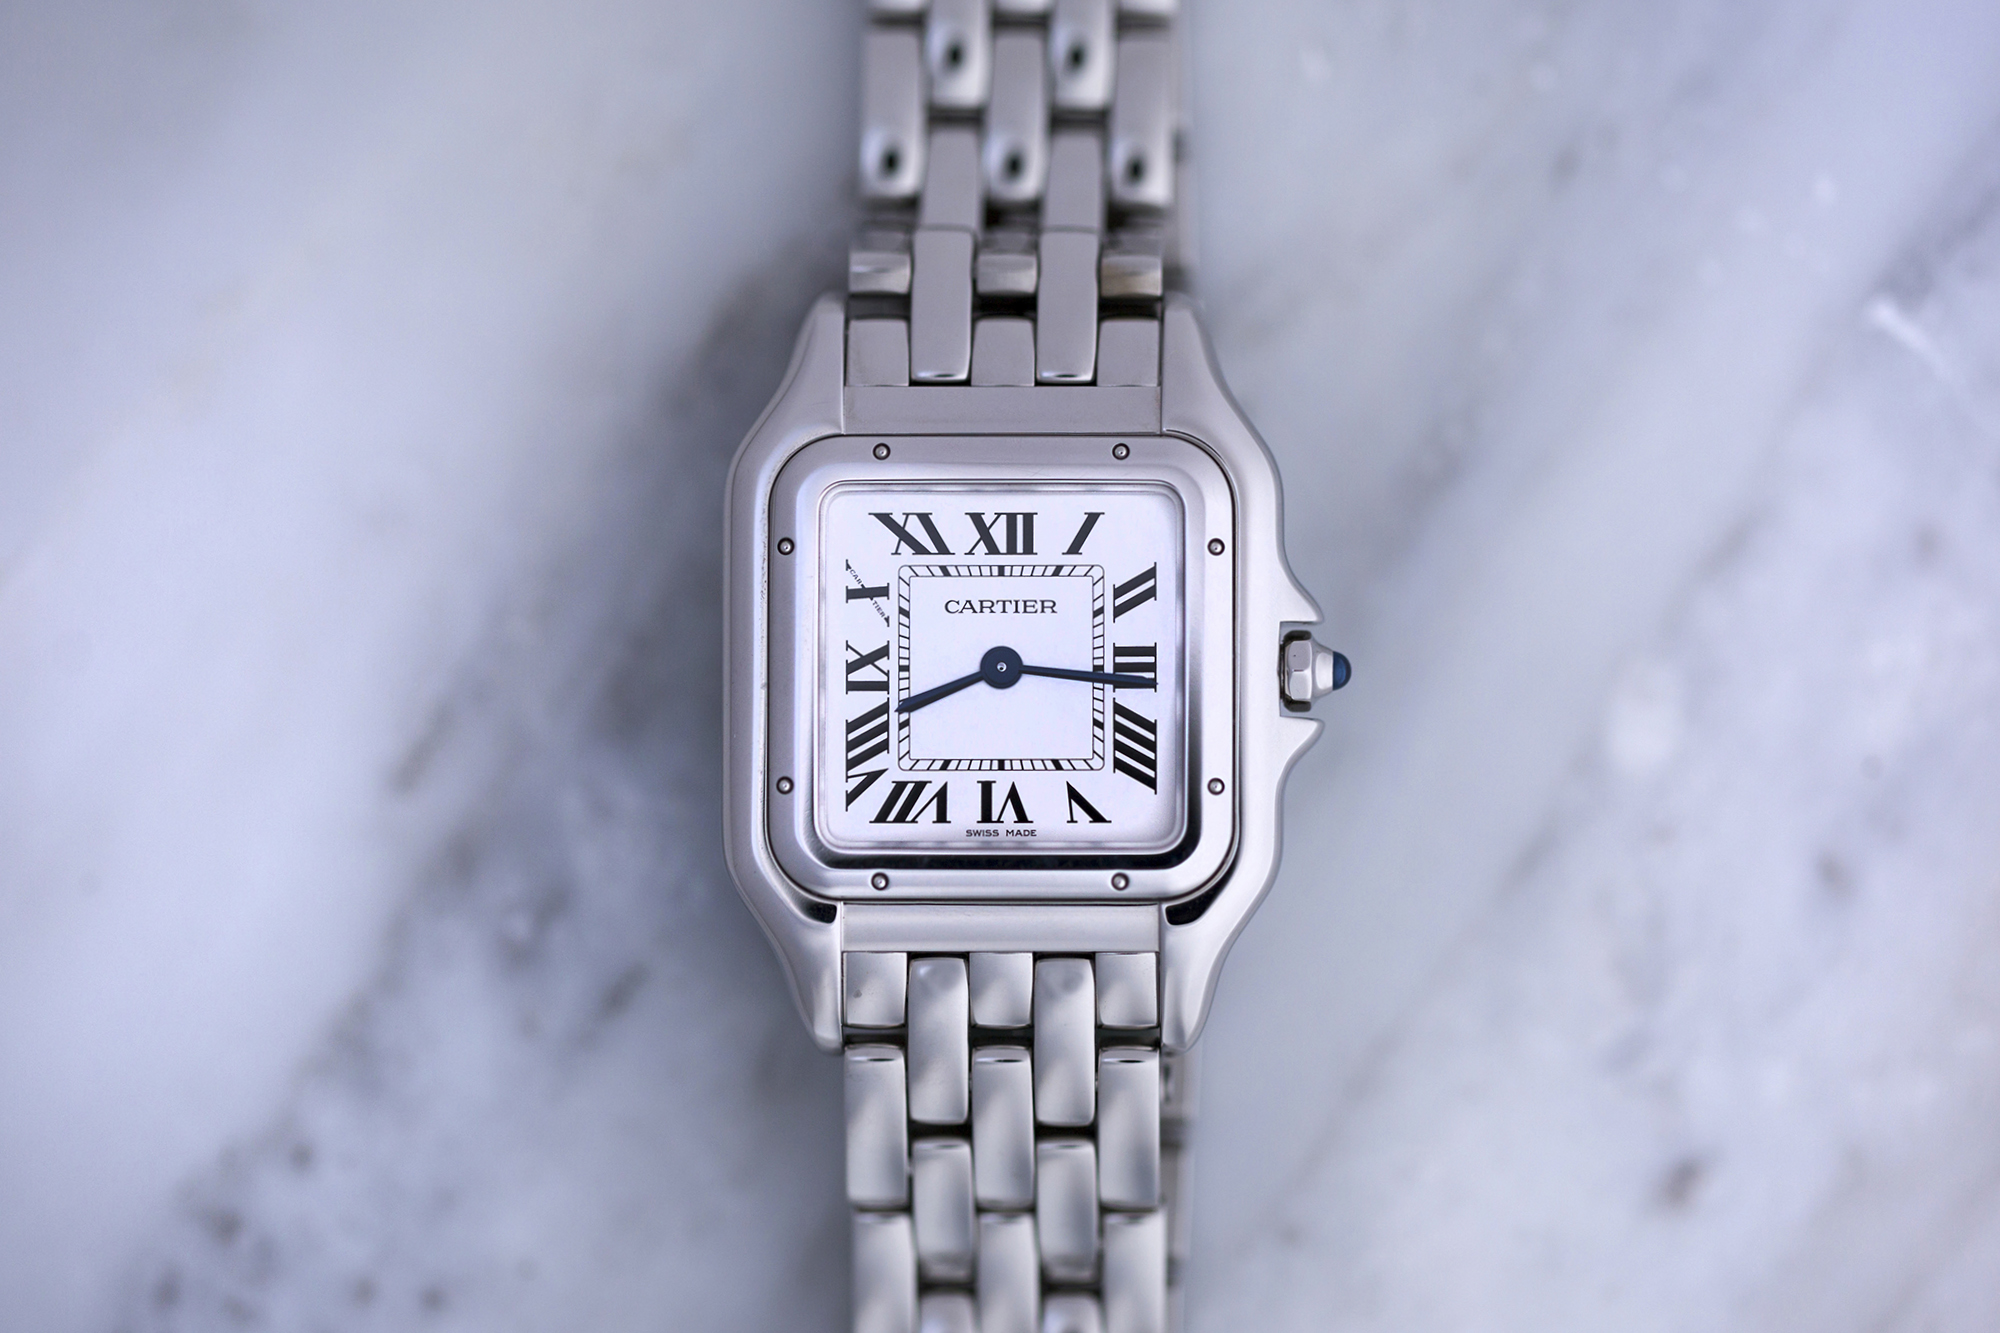 unclasping a cartier watch